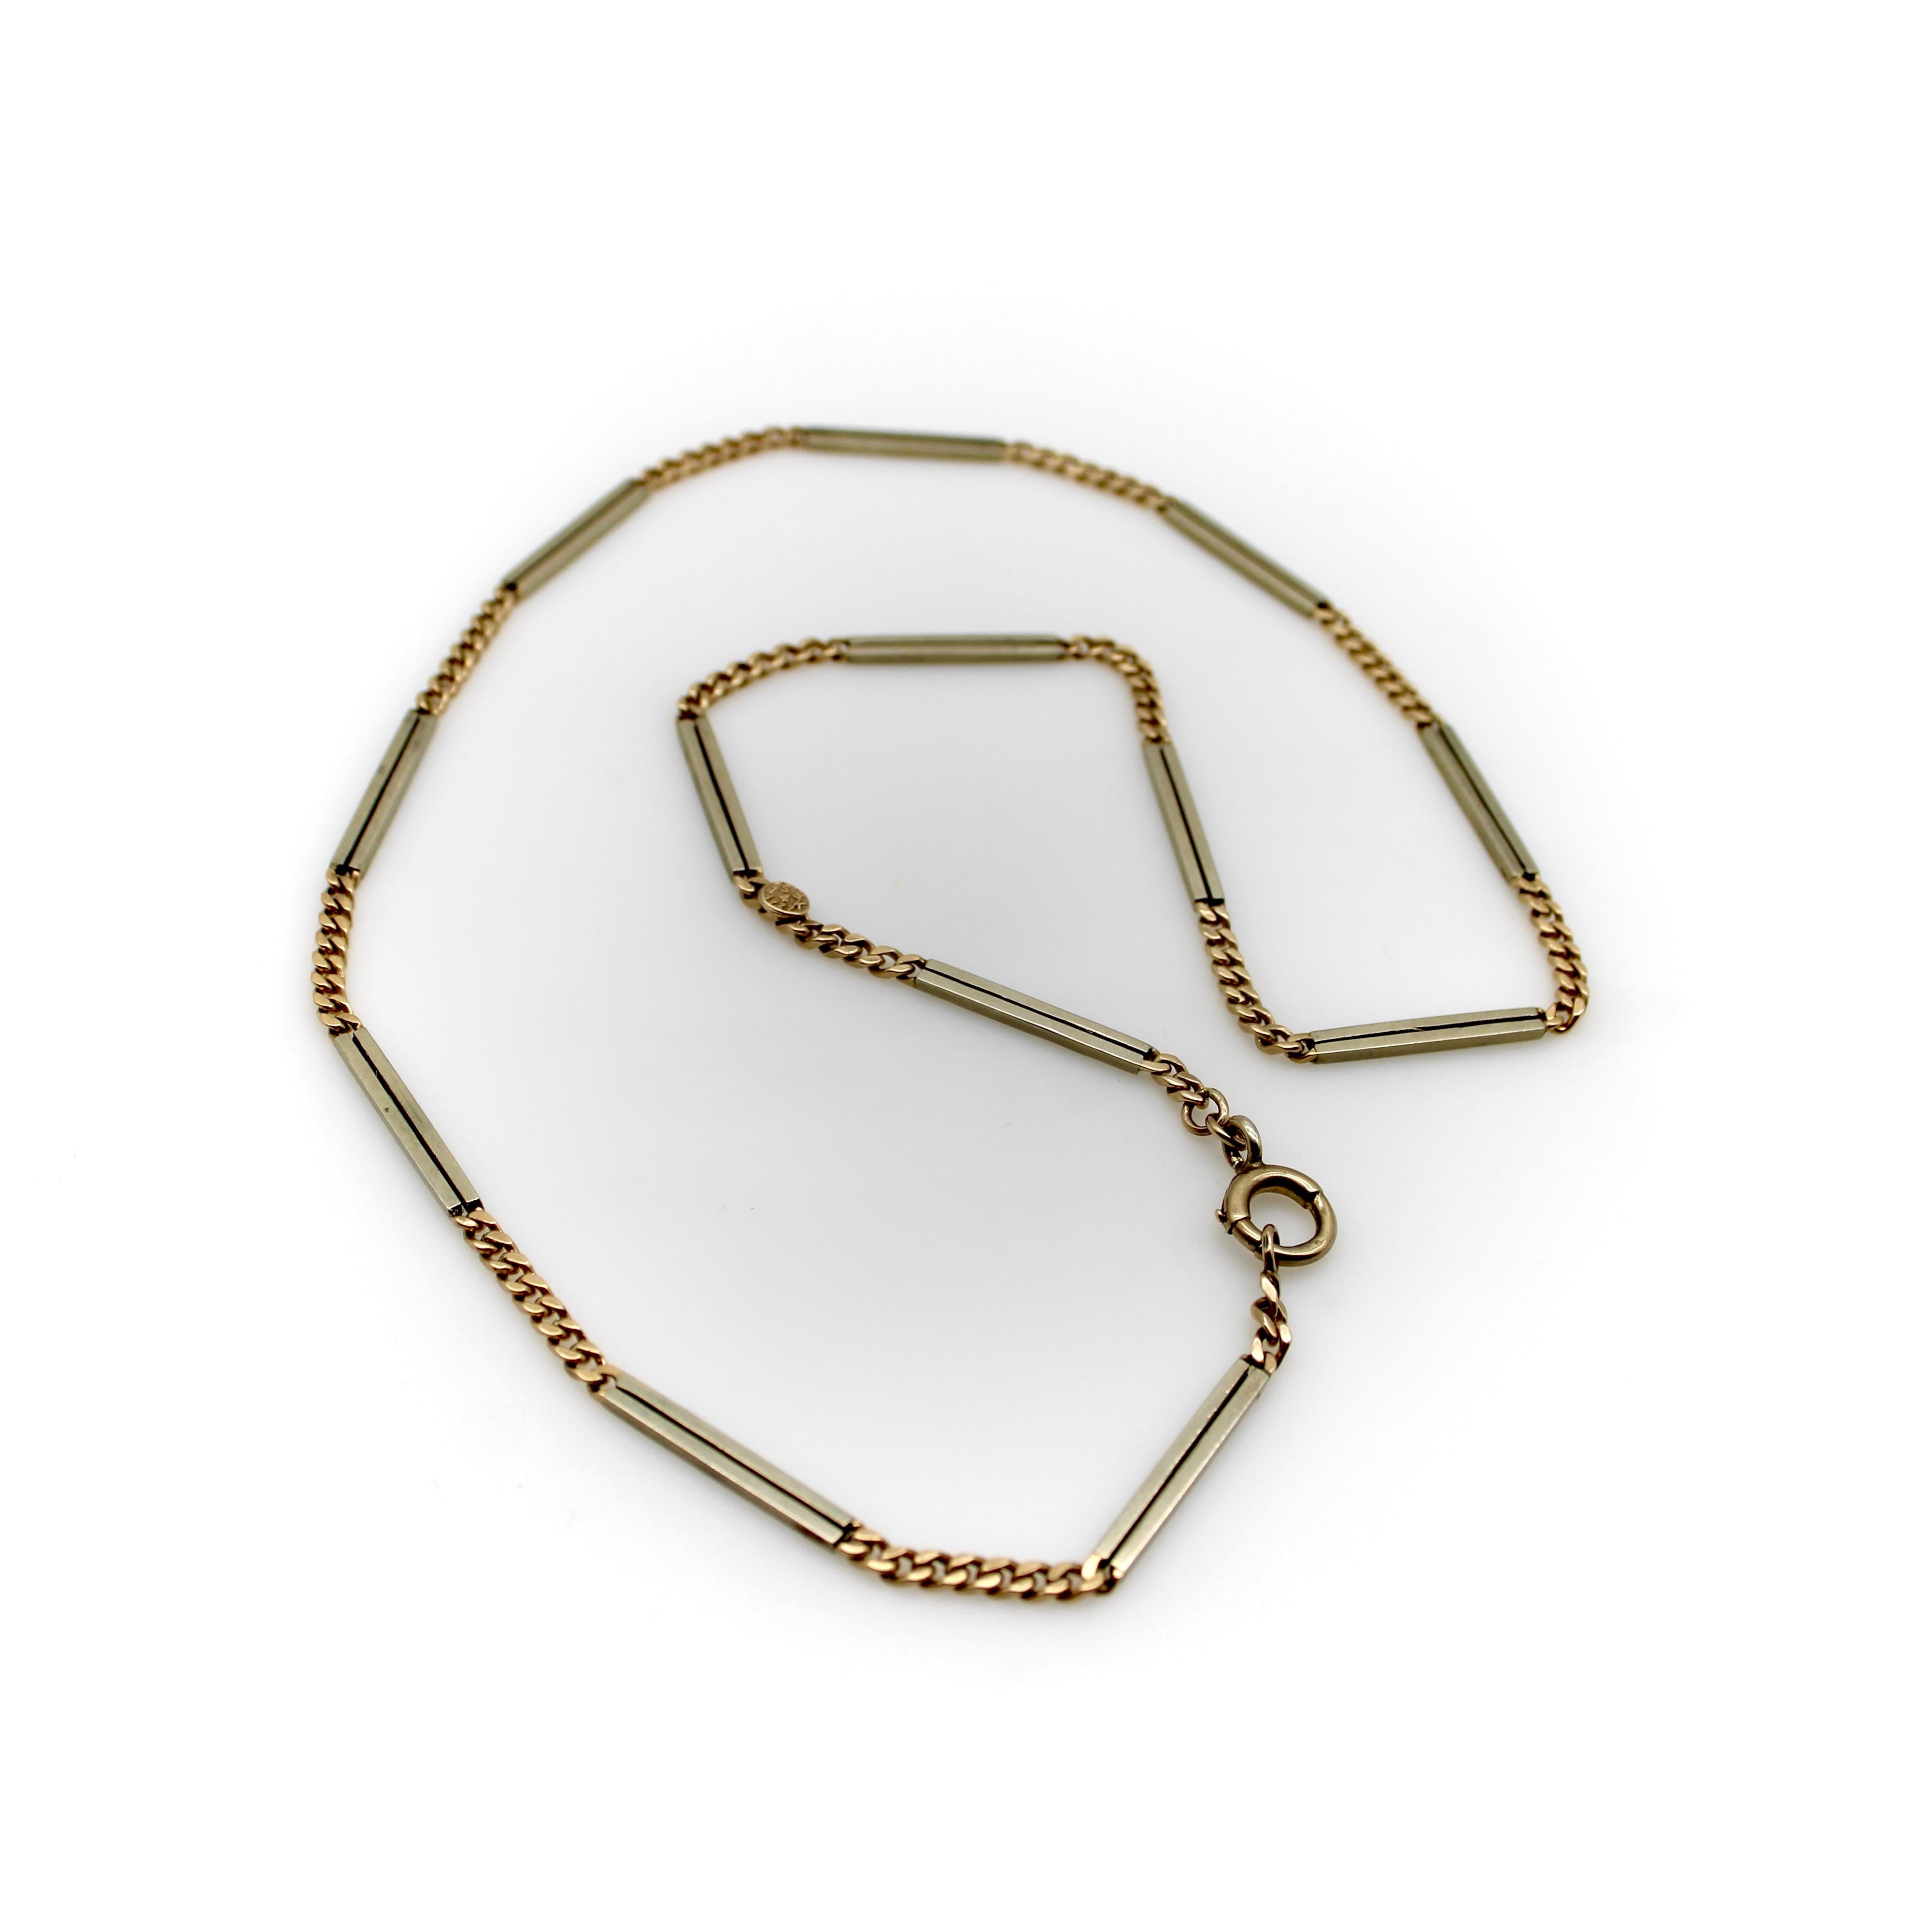 Alternating between links of white and yellow gold, this 14k Art Deco watch chain is bold and unique. The white gold sections of the chain consist of bisected bar links with narrow beams of open space down the center of the bars. On either end of